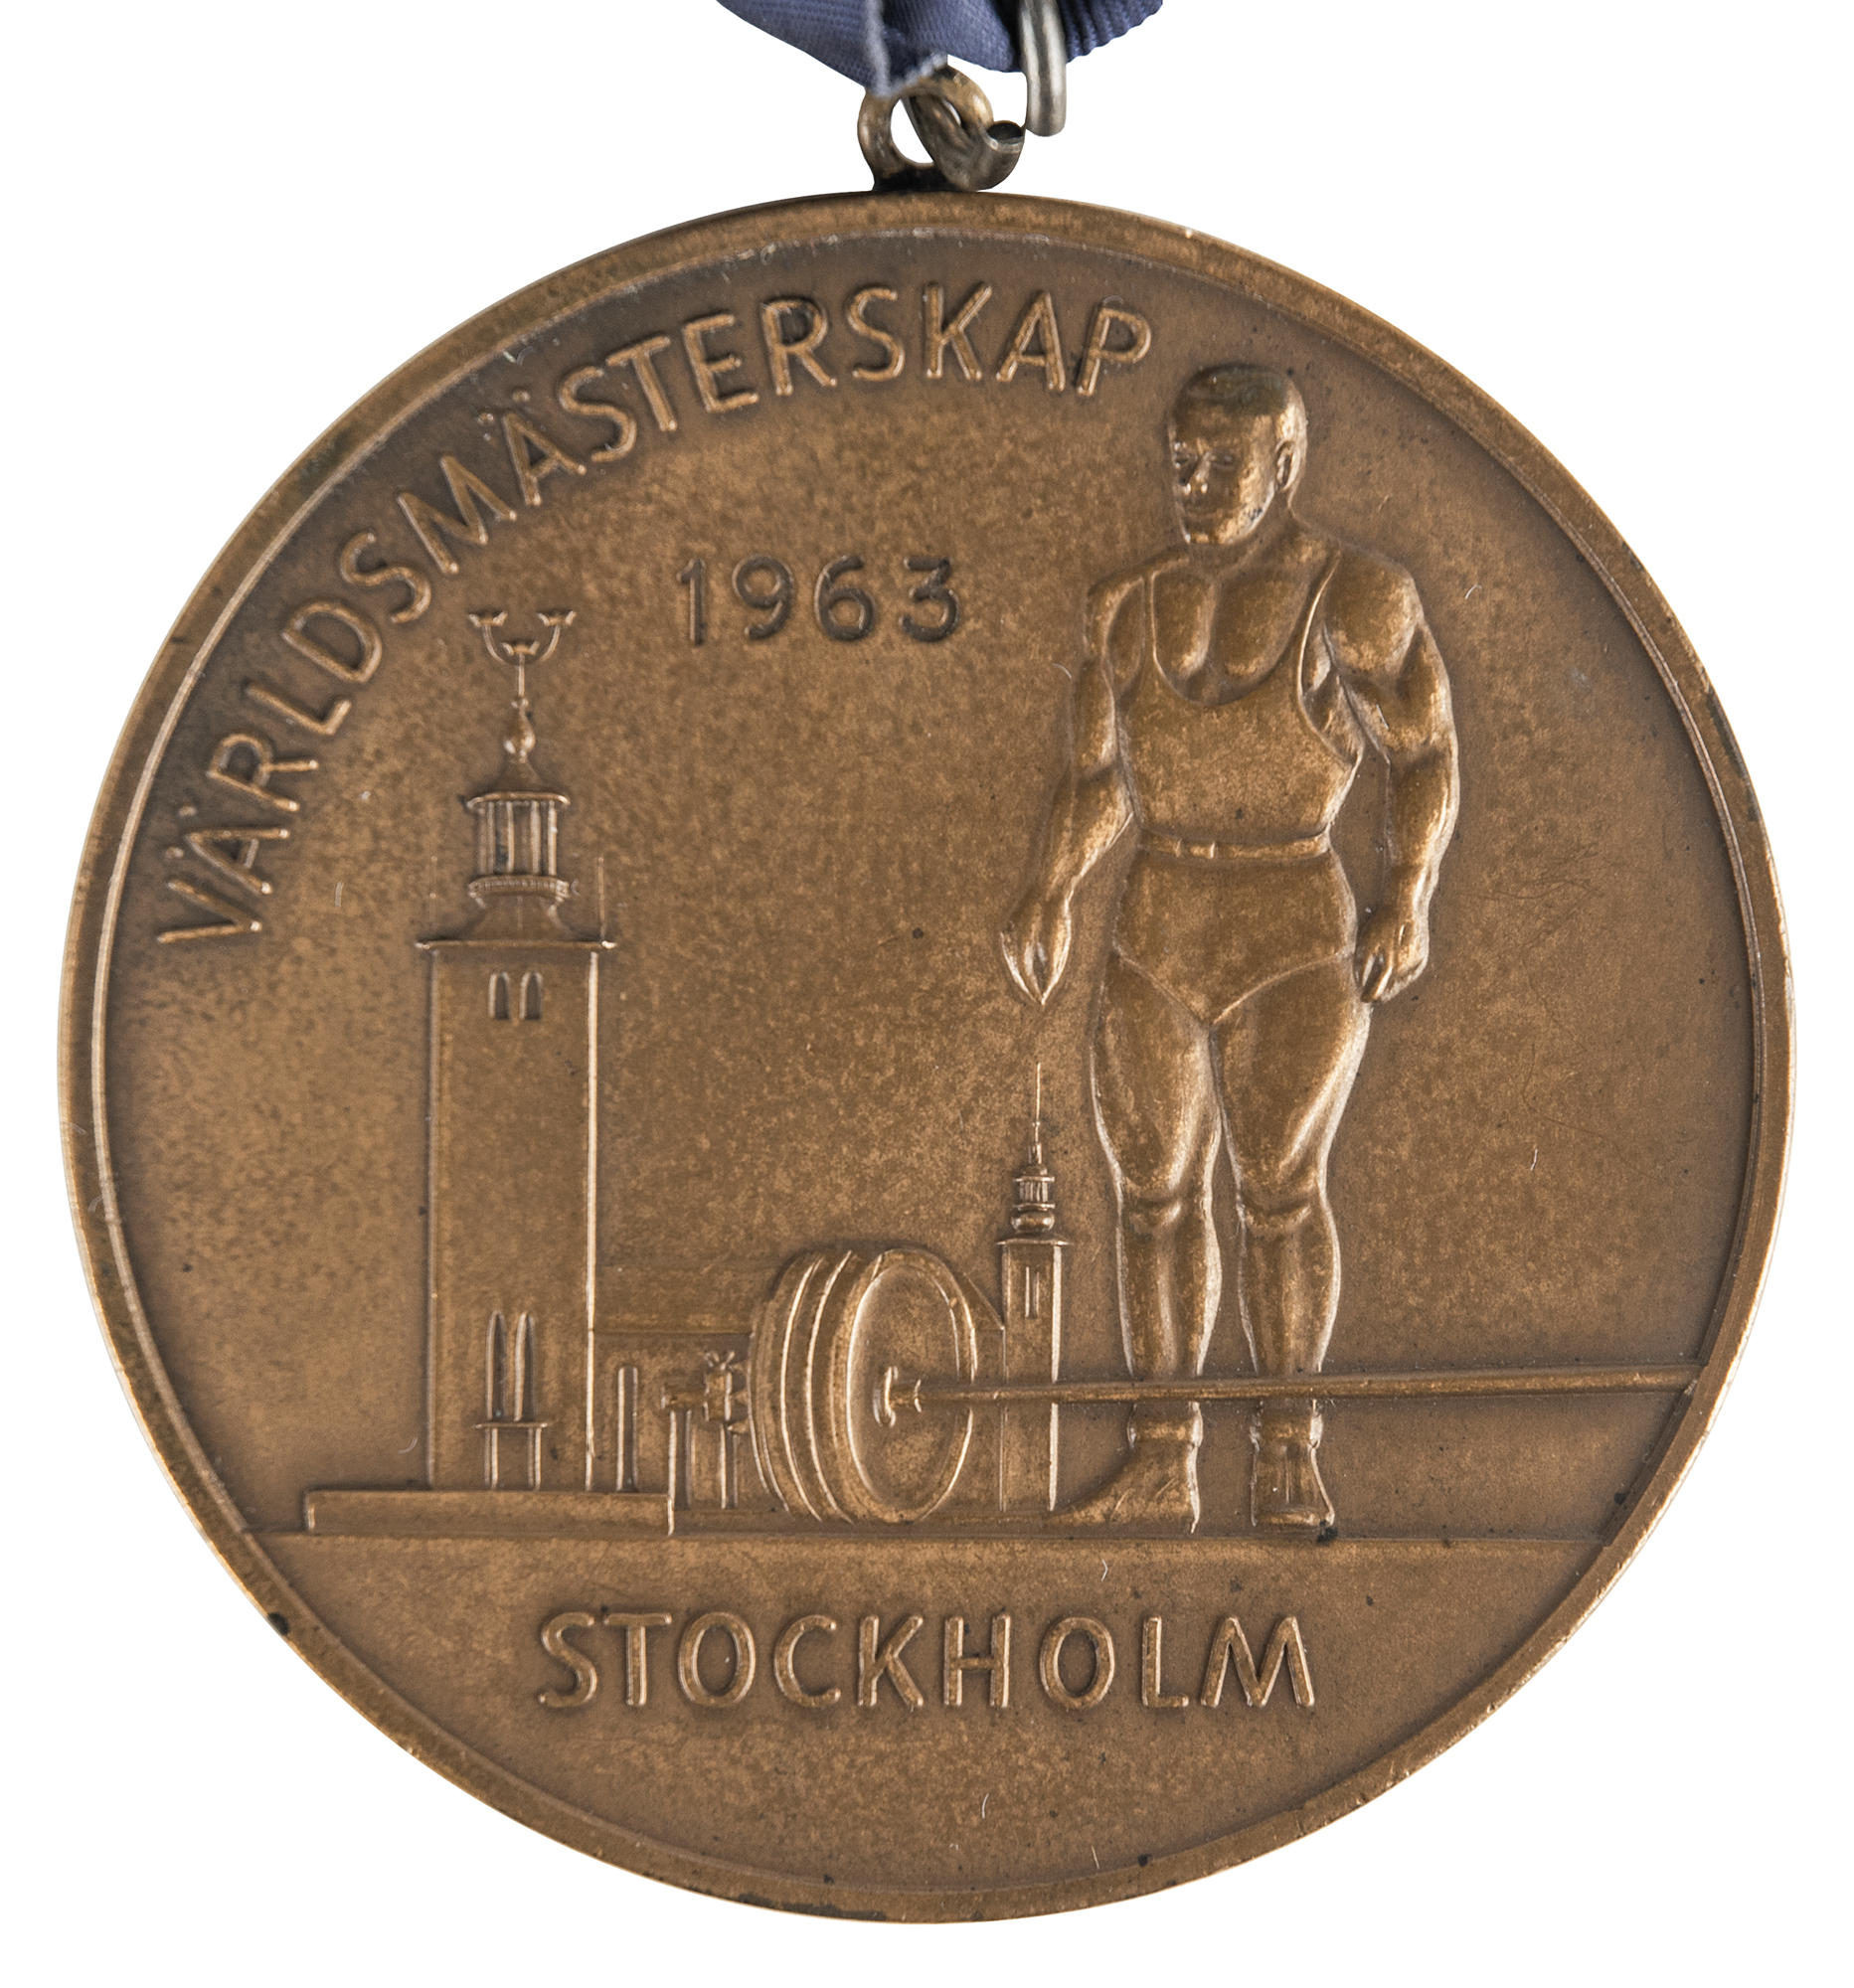 Lot #6066 Leonid Zhabotinsky's Bronze Winner's Medal and Plaque from the Stockholm 1963 World Weightlifting Championships